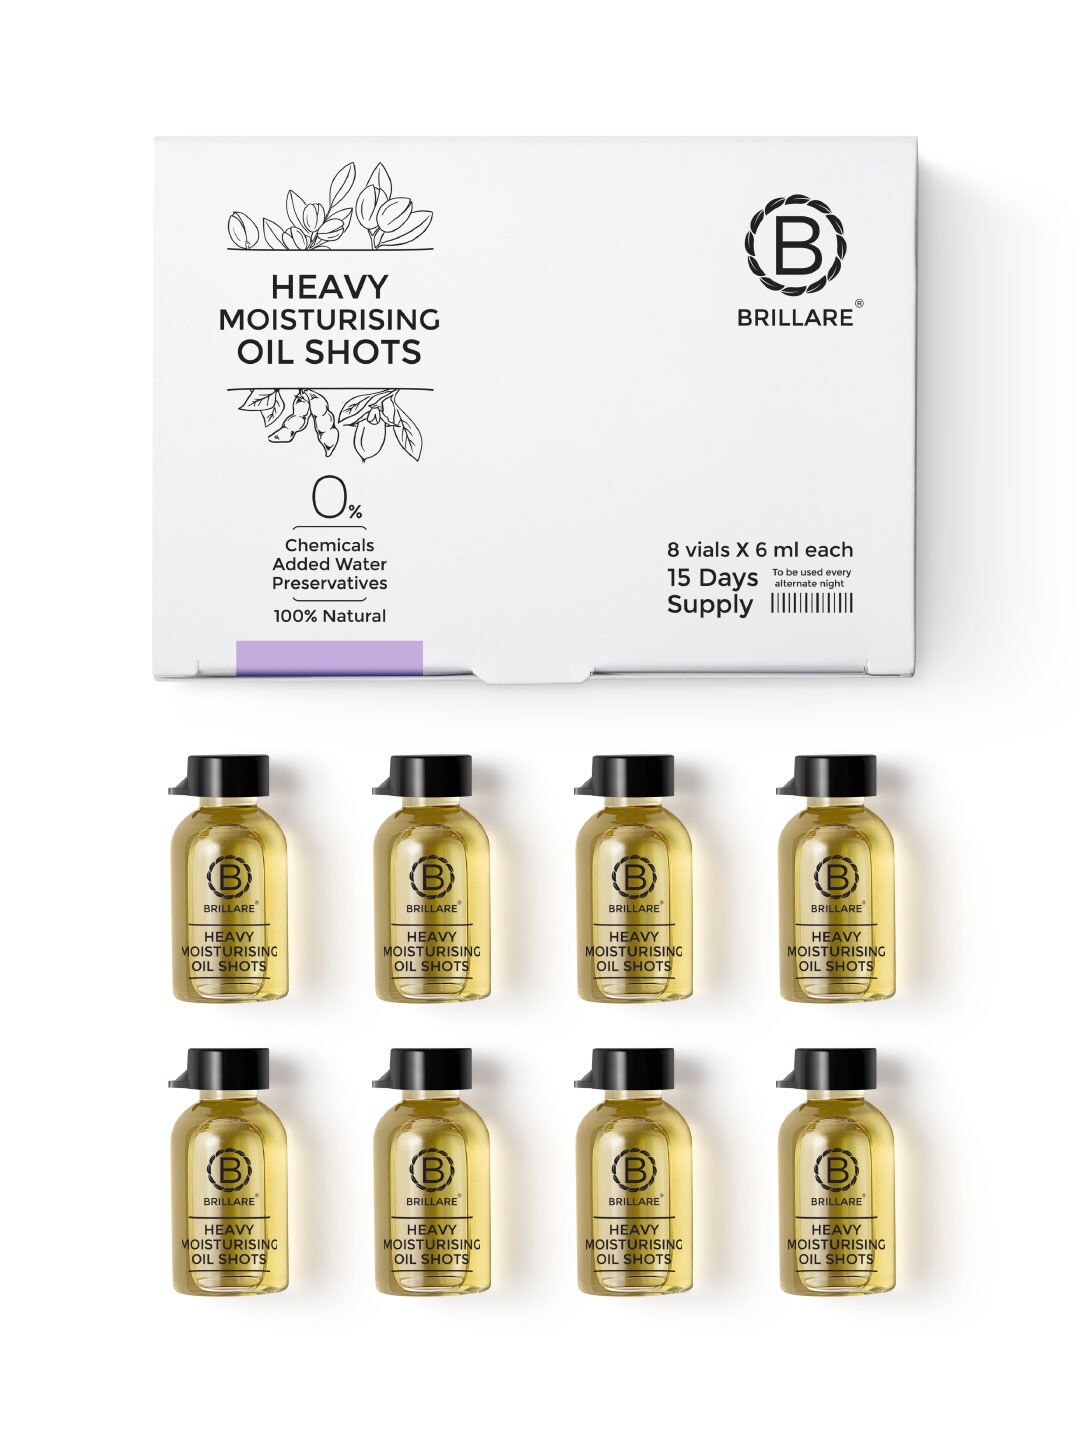 BRILLARE Heavy Moisturising Oil Shots for Dry & Frizzy Hair - 6 ml Each  Price in India, Full Specifications & Offers 